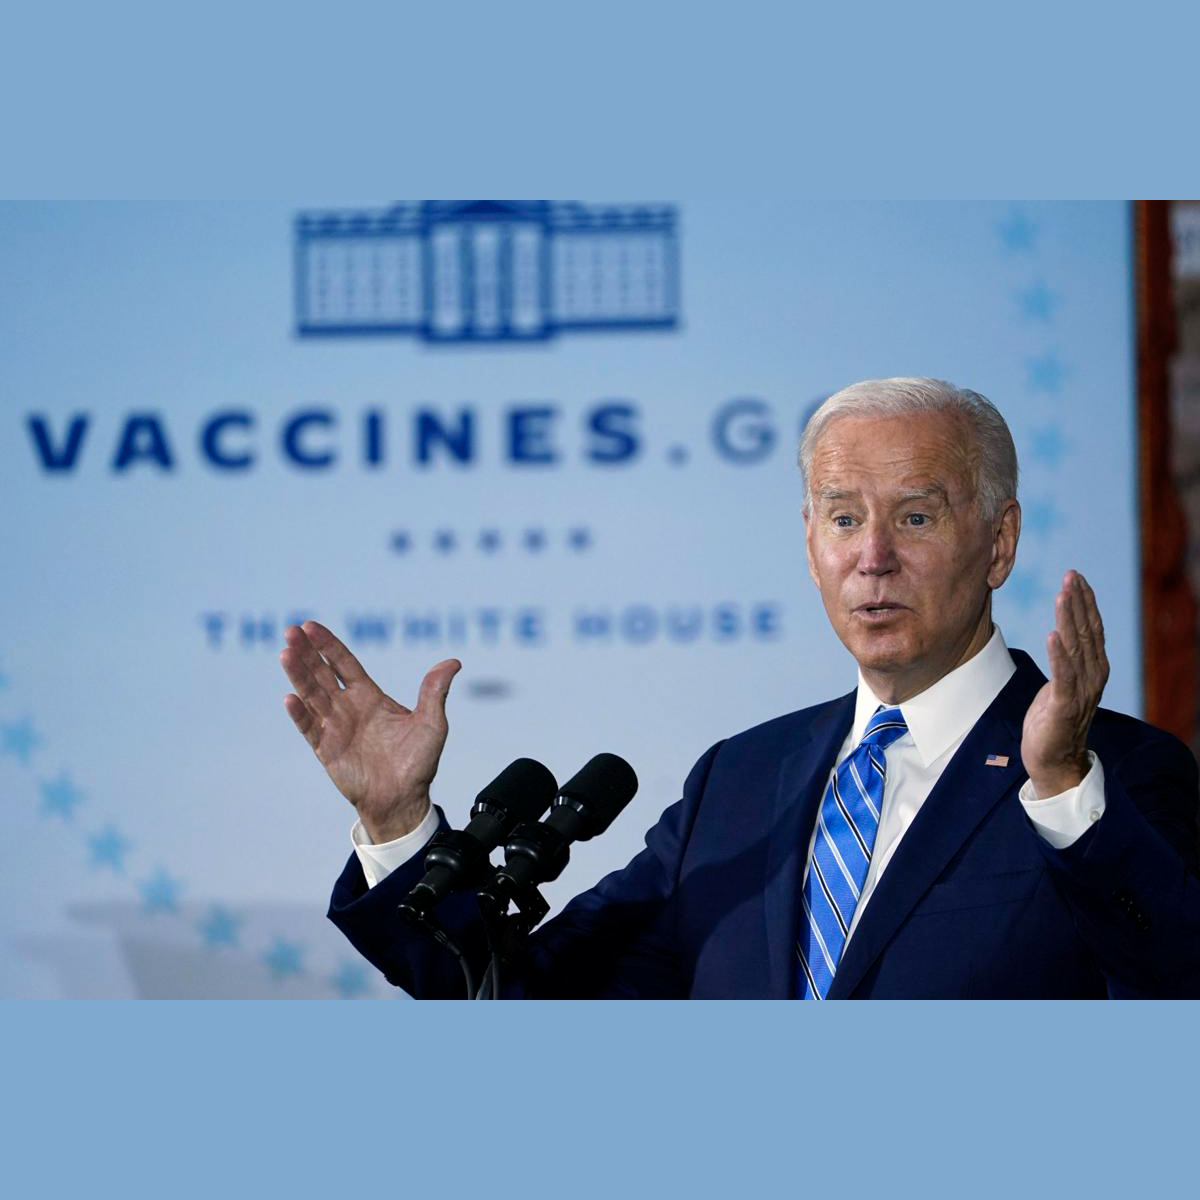 Lawsuits Over Workplace Vaccine Rule With Focus on States' Rights